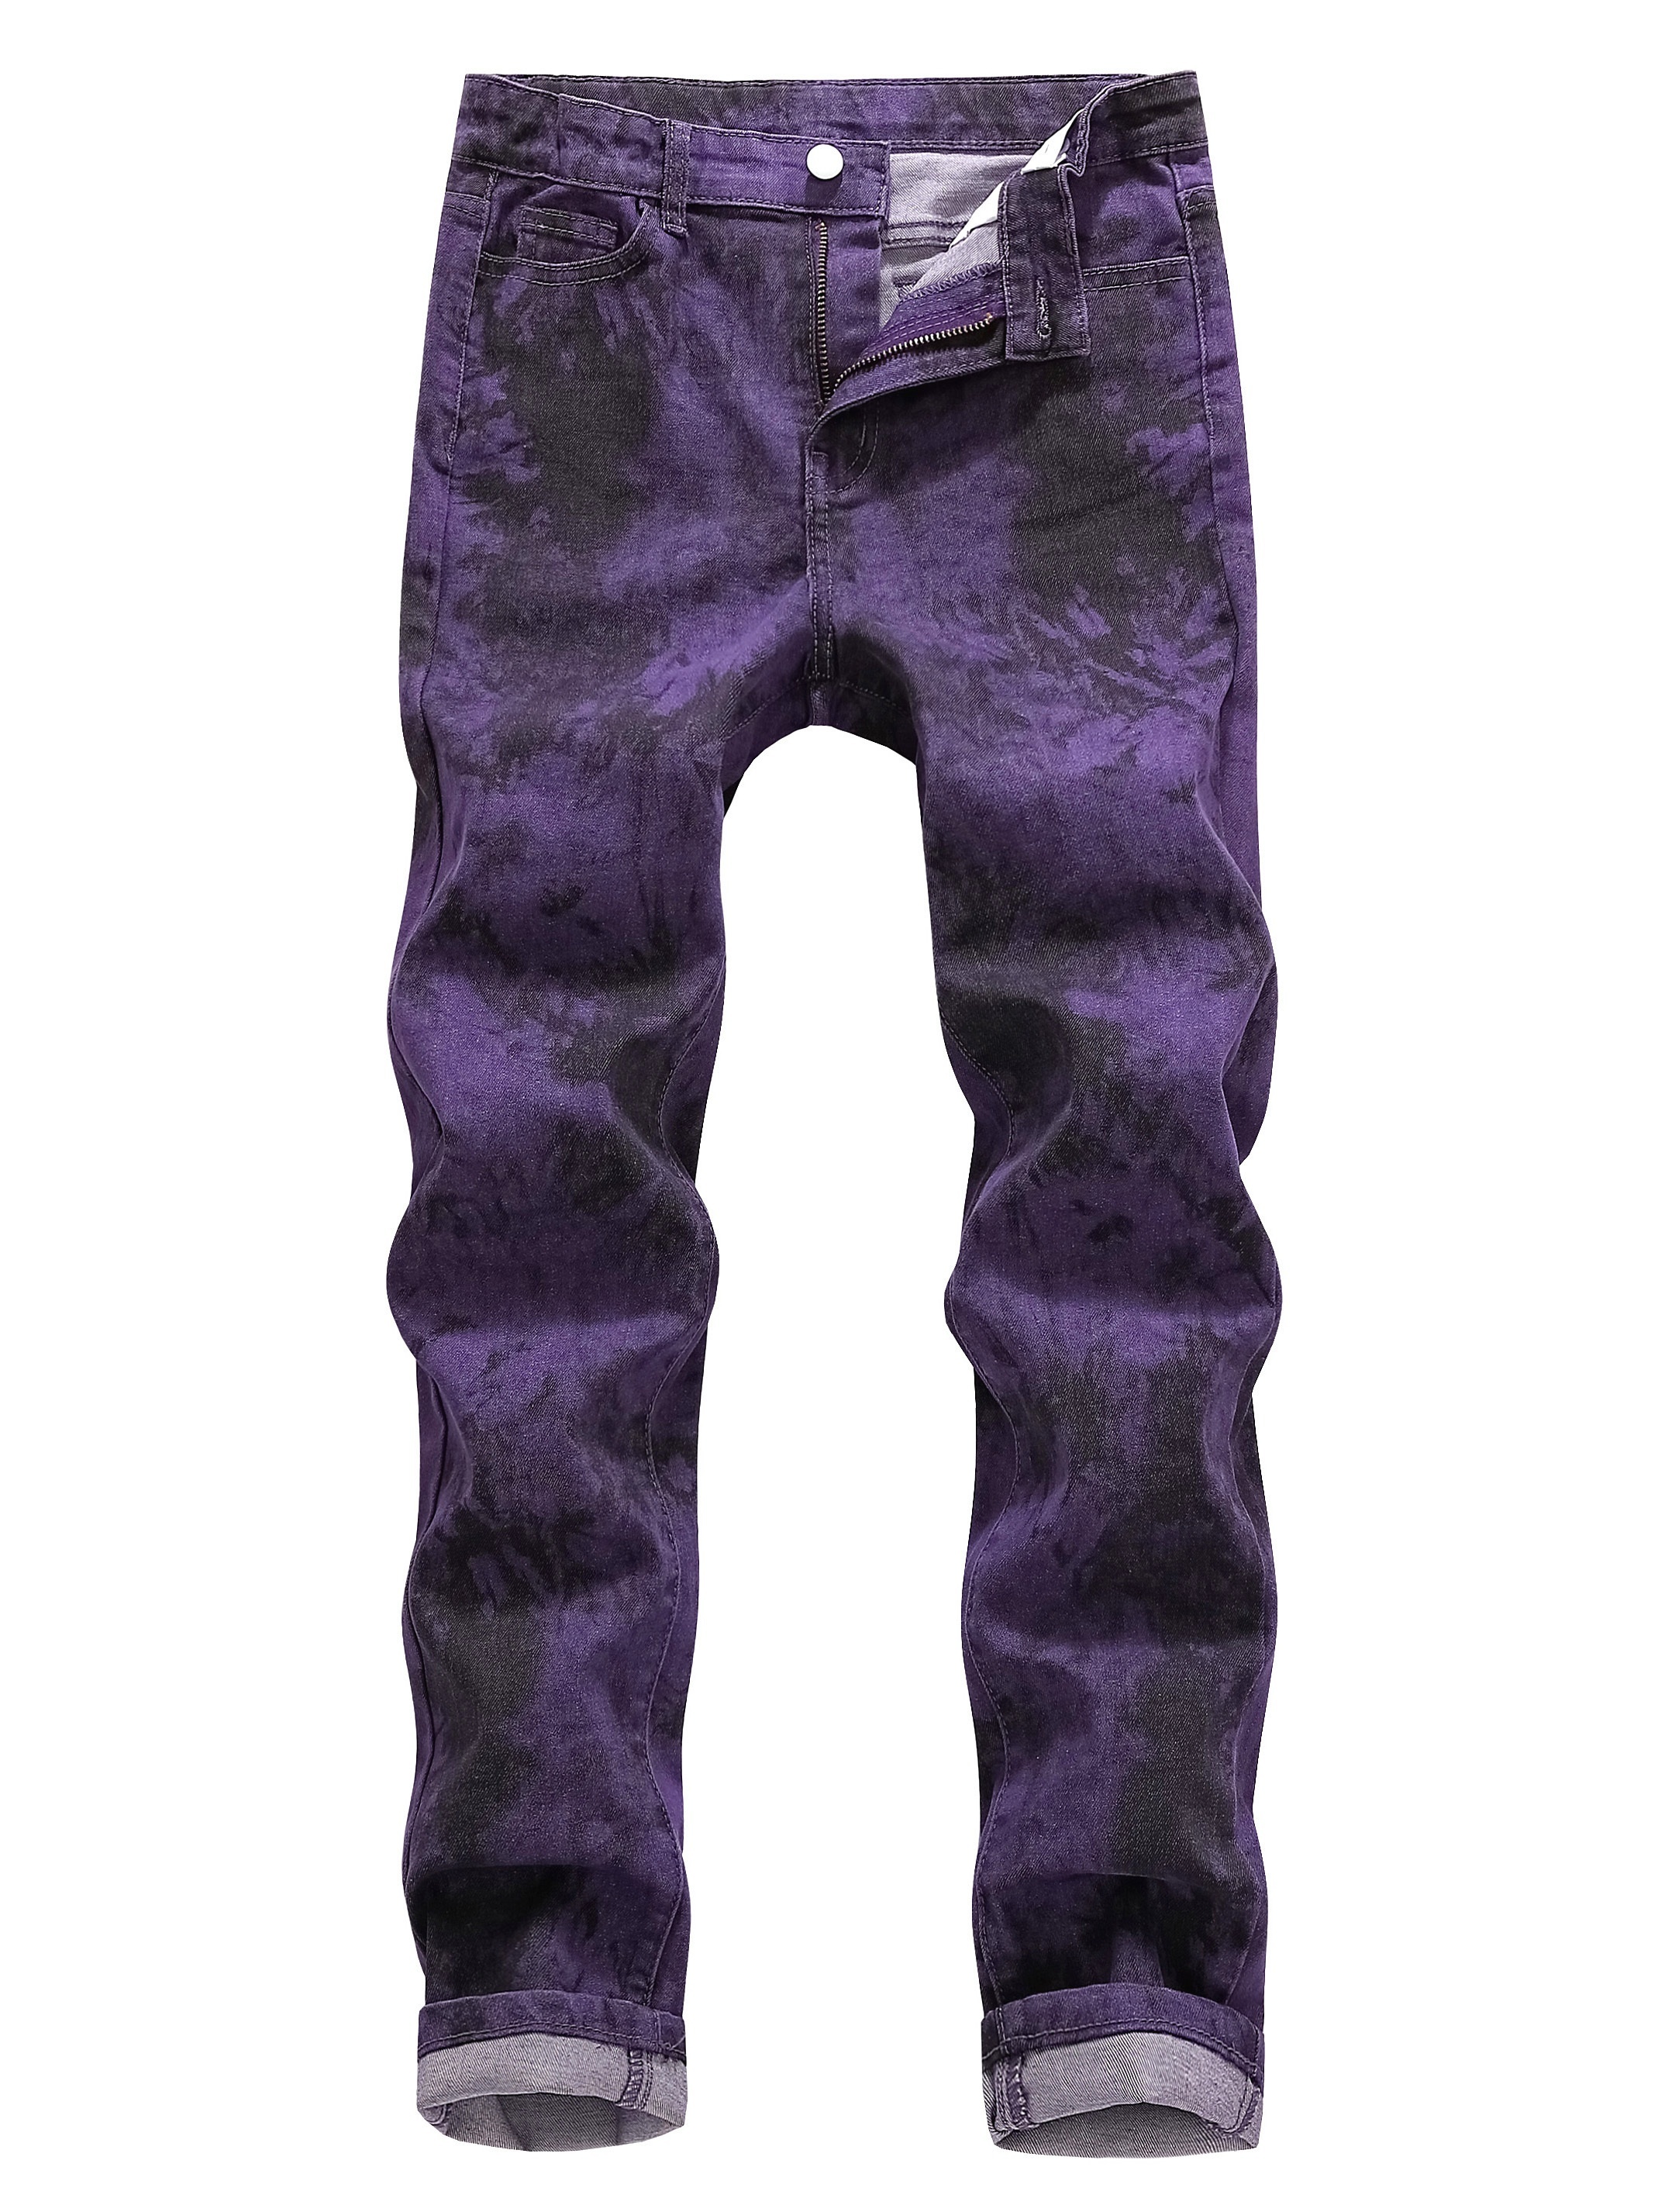 Purple Jeans Designer Jeans for Men Purple Jeans Tag Brand Men with Tag  Summer Hole Hight Quality Embroidery Purple Denim Trousers Mens Jean